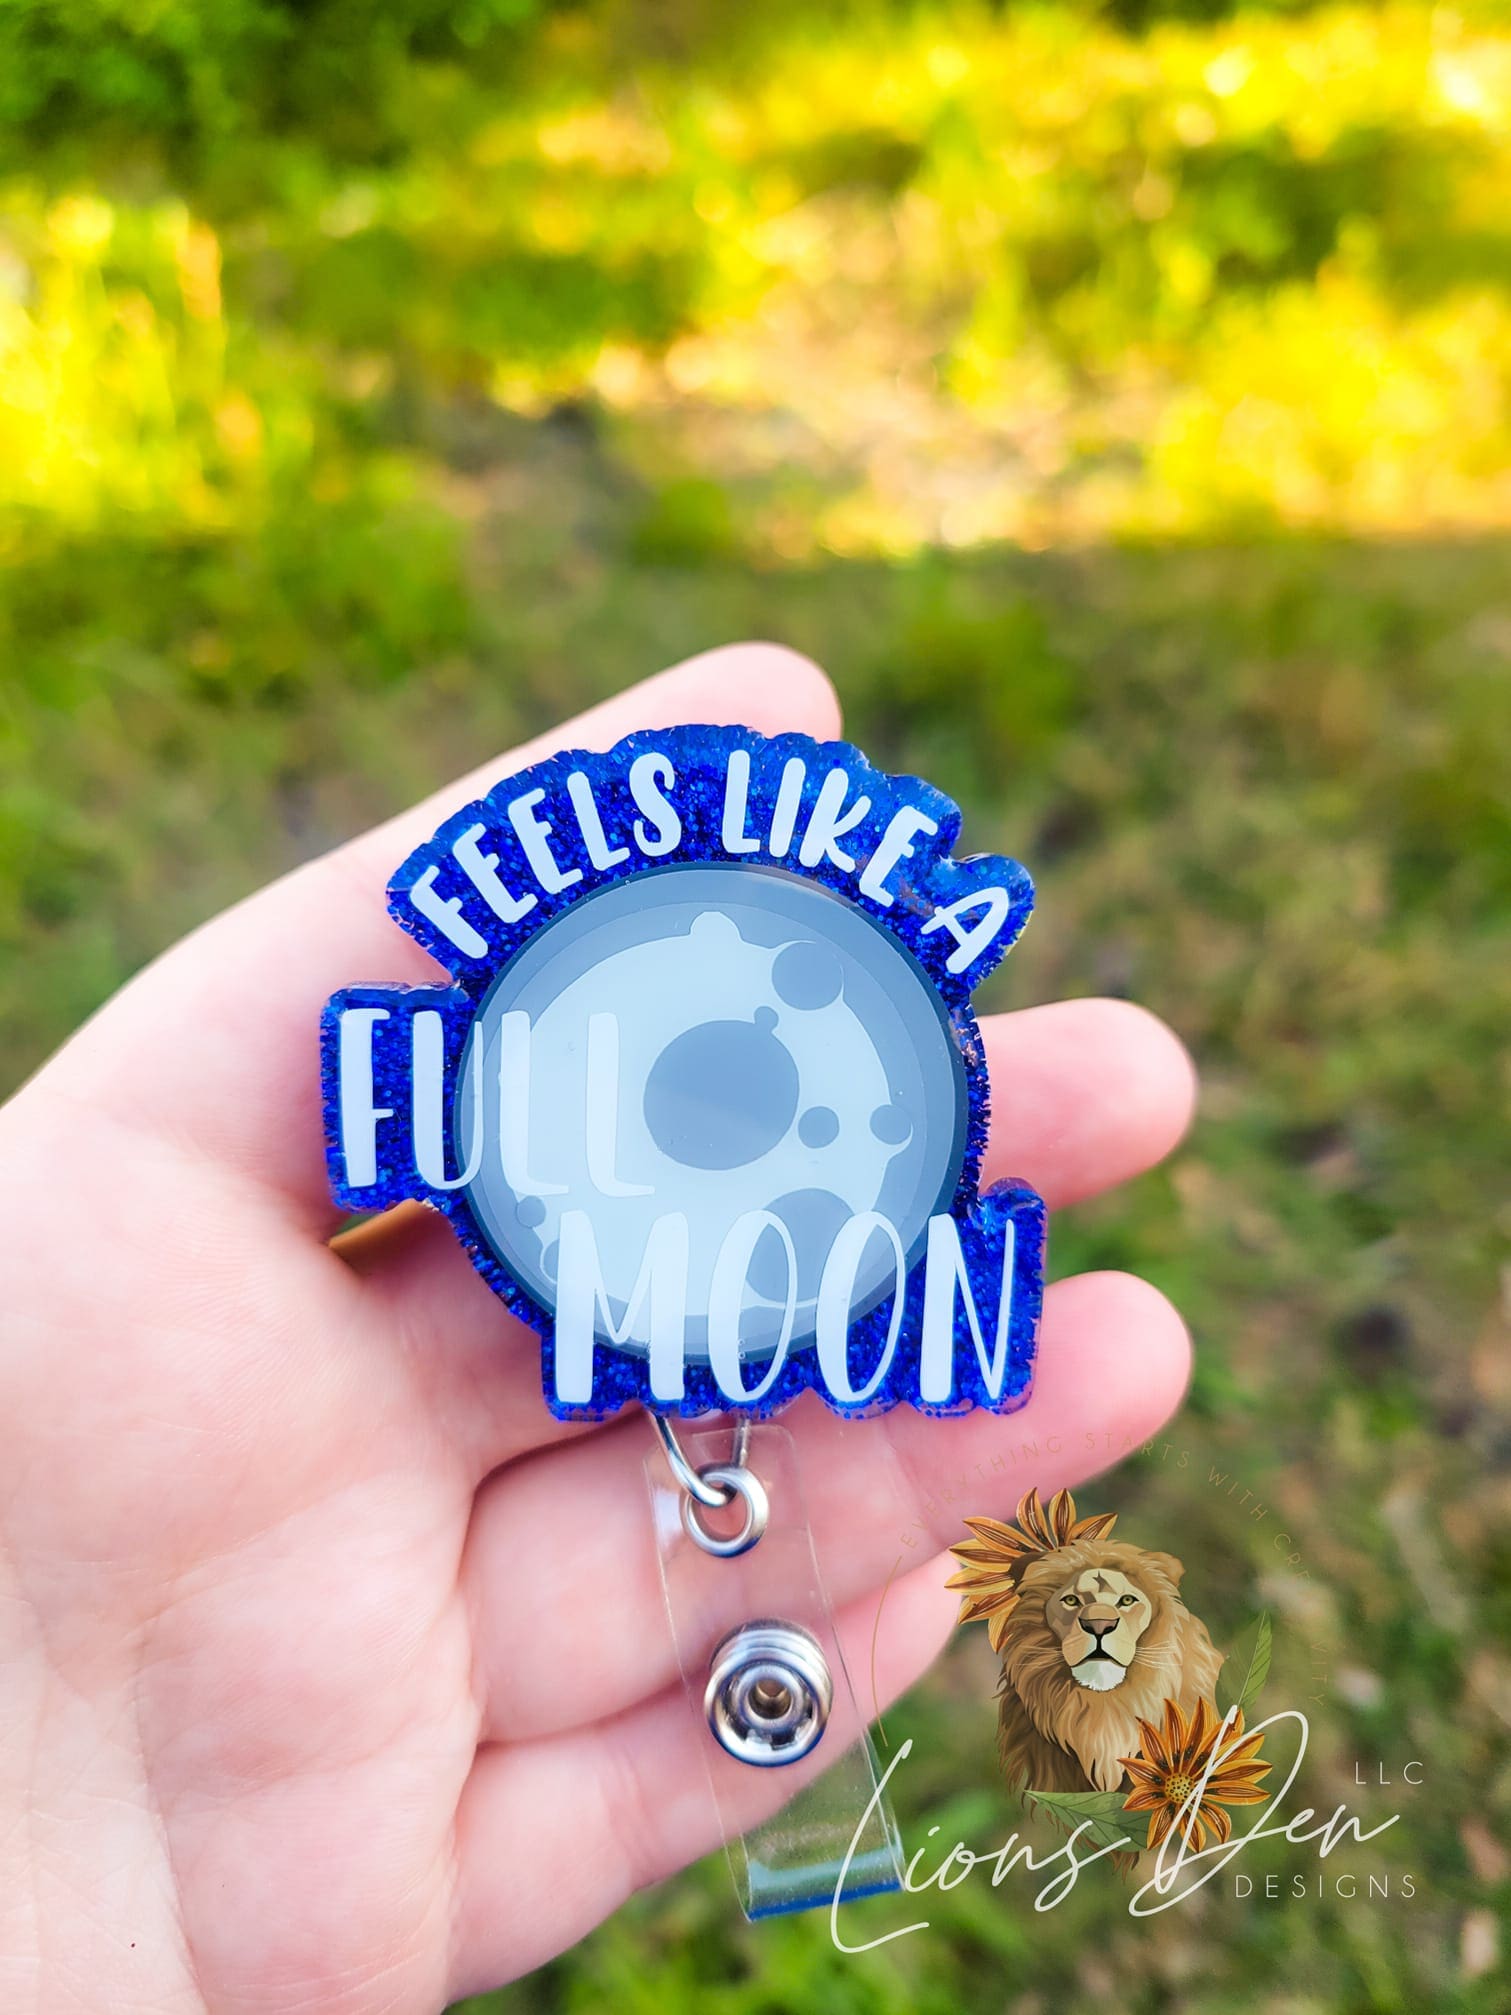 Feels Like a Full Moon acrylic blank (2 inch) NO HOLE – Acrylic Blanks,  Stickers, Printed Vinyl, Glitter and more!